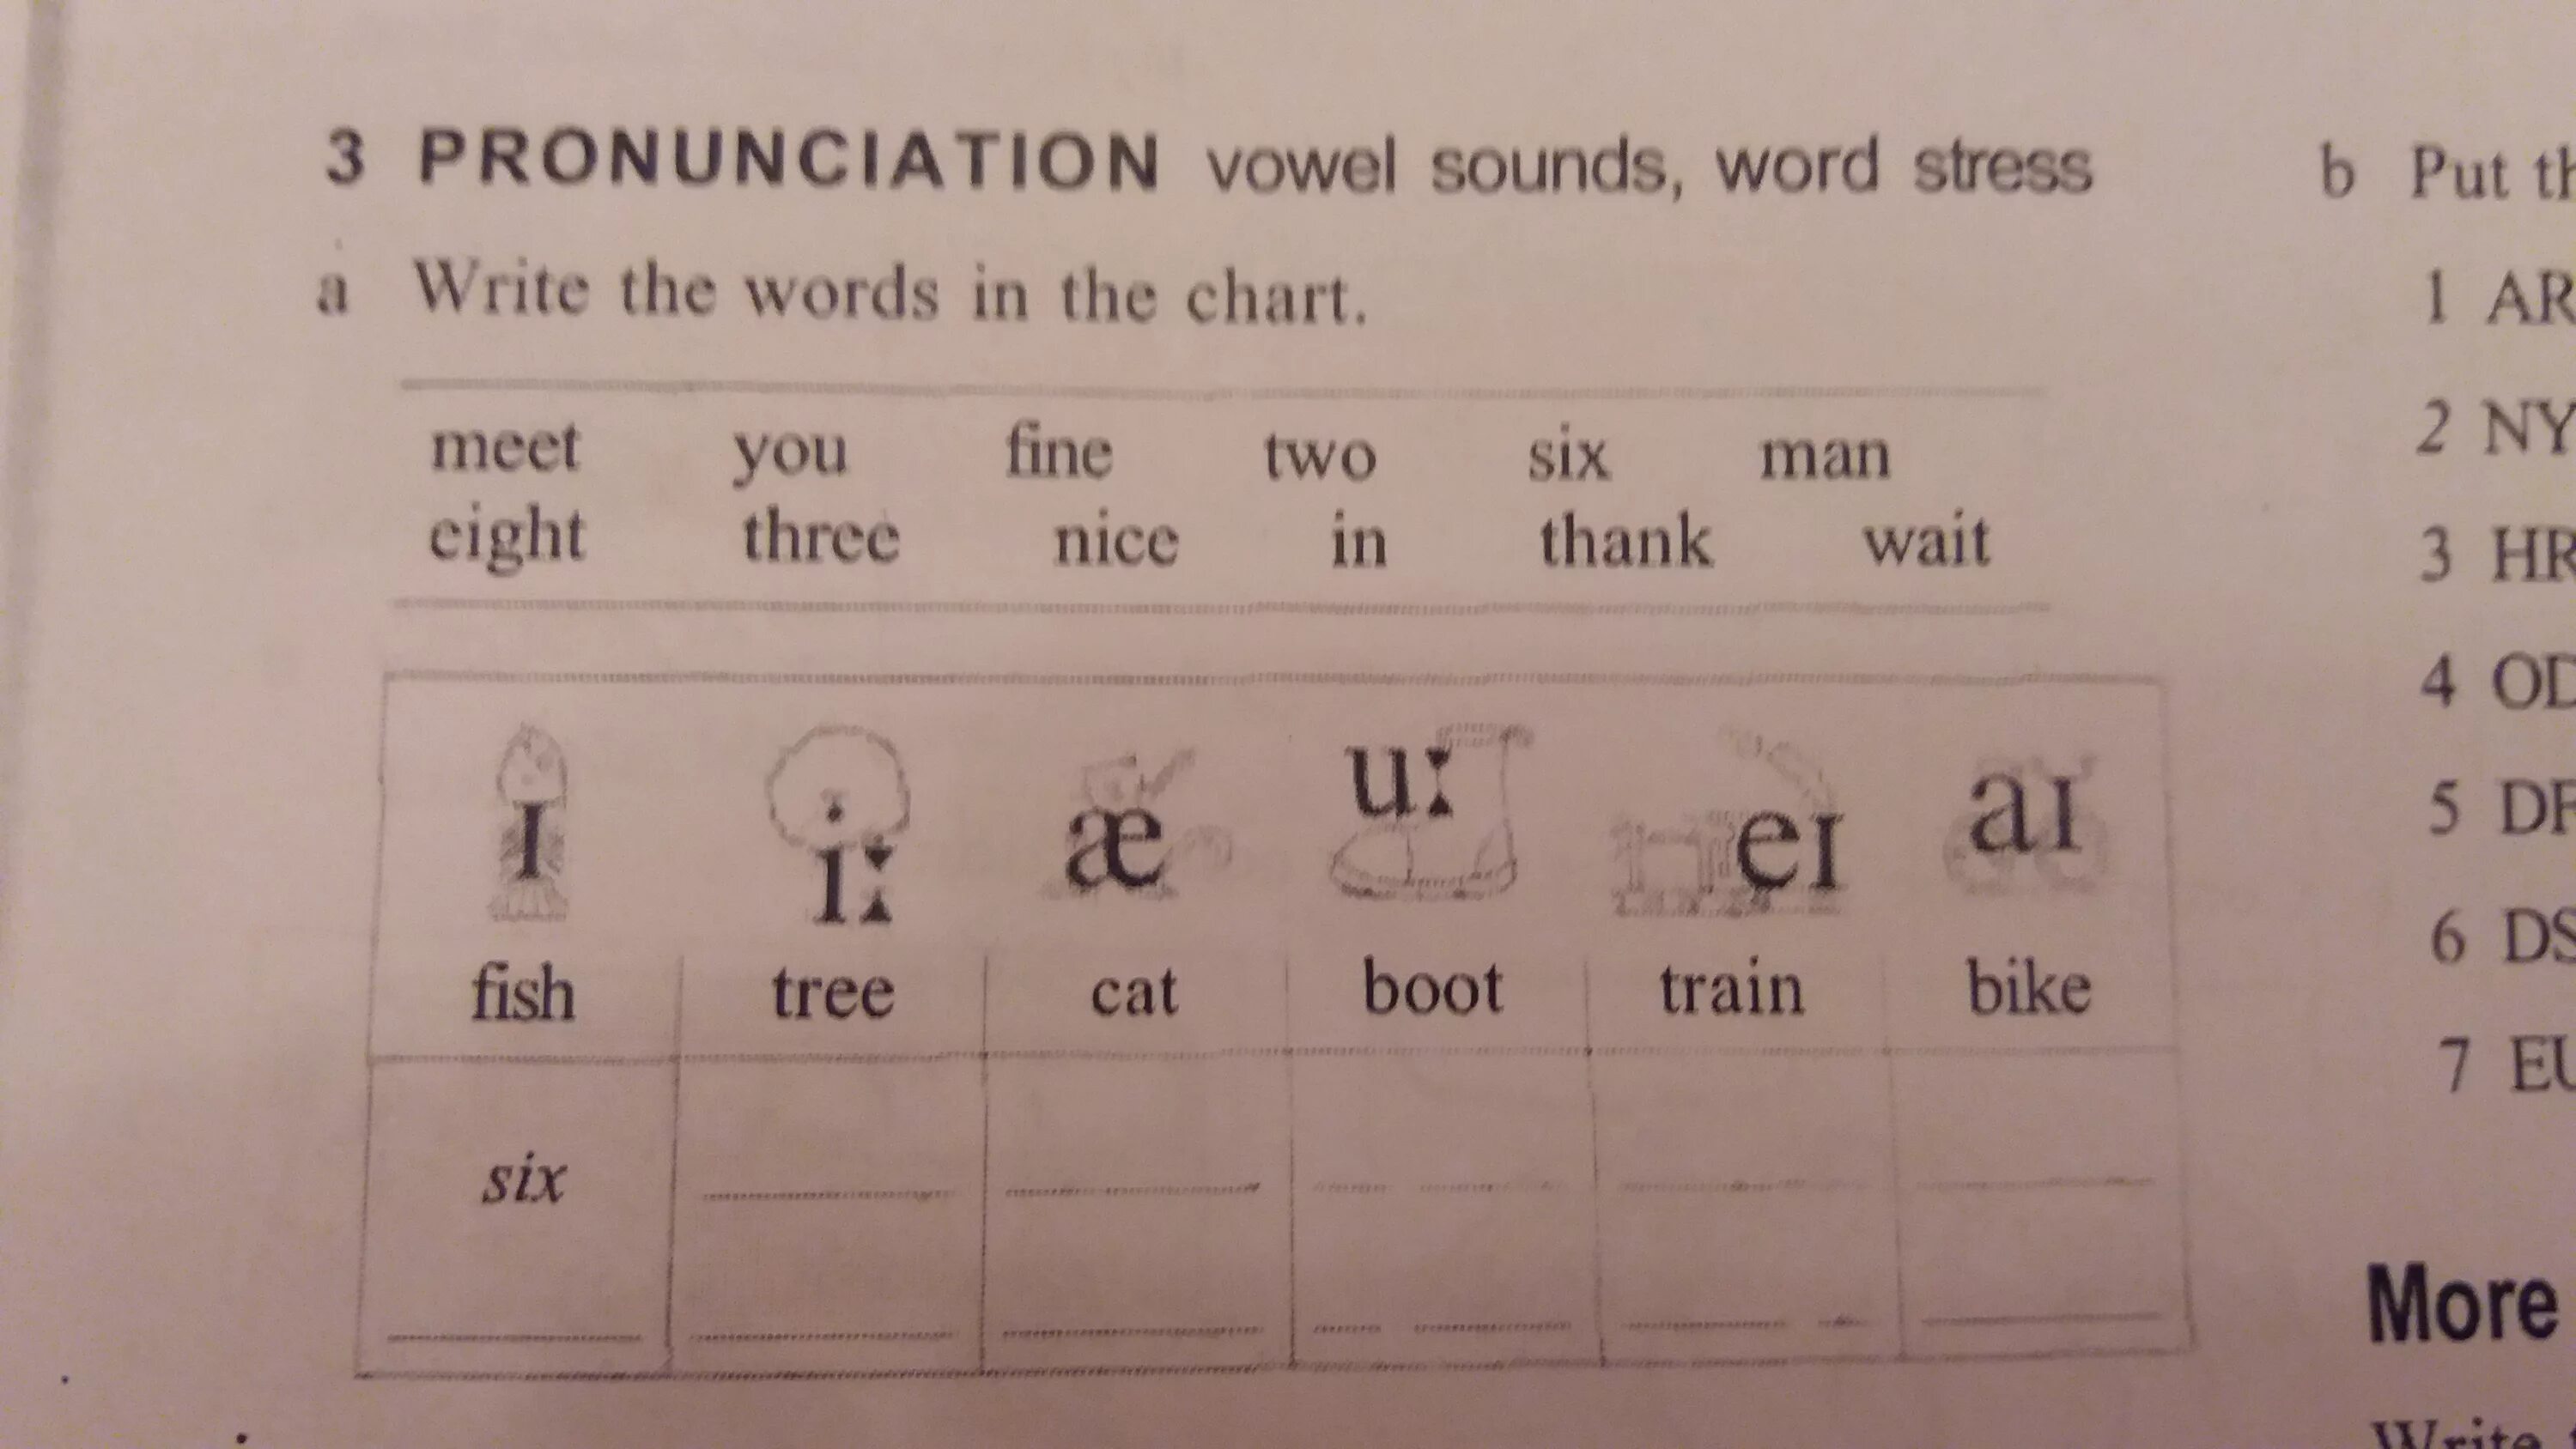 Listen and write the letter. Write the Words in the Chart. Write the Words in English. Write the Worlds in the Chart. Pronunciation Vowel Sounds Word stress . Write the in the Chart.